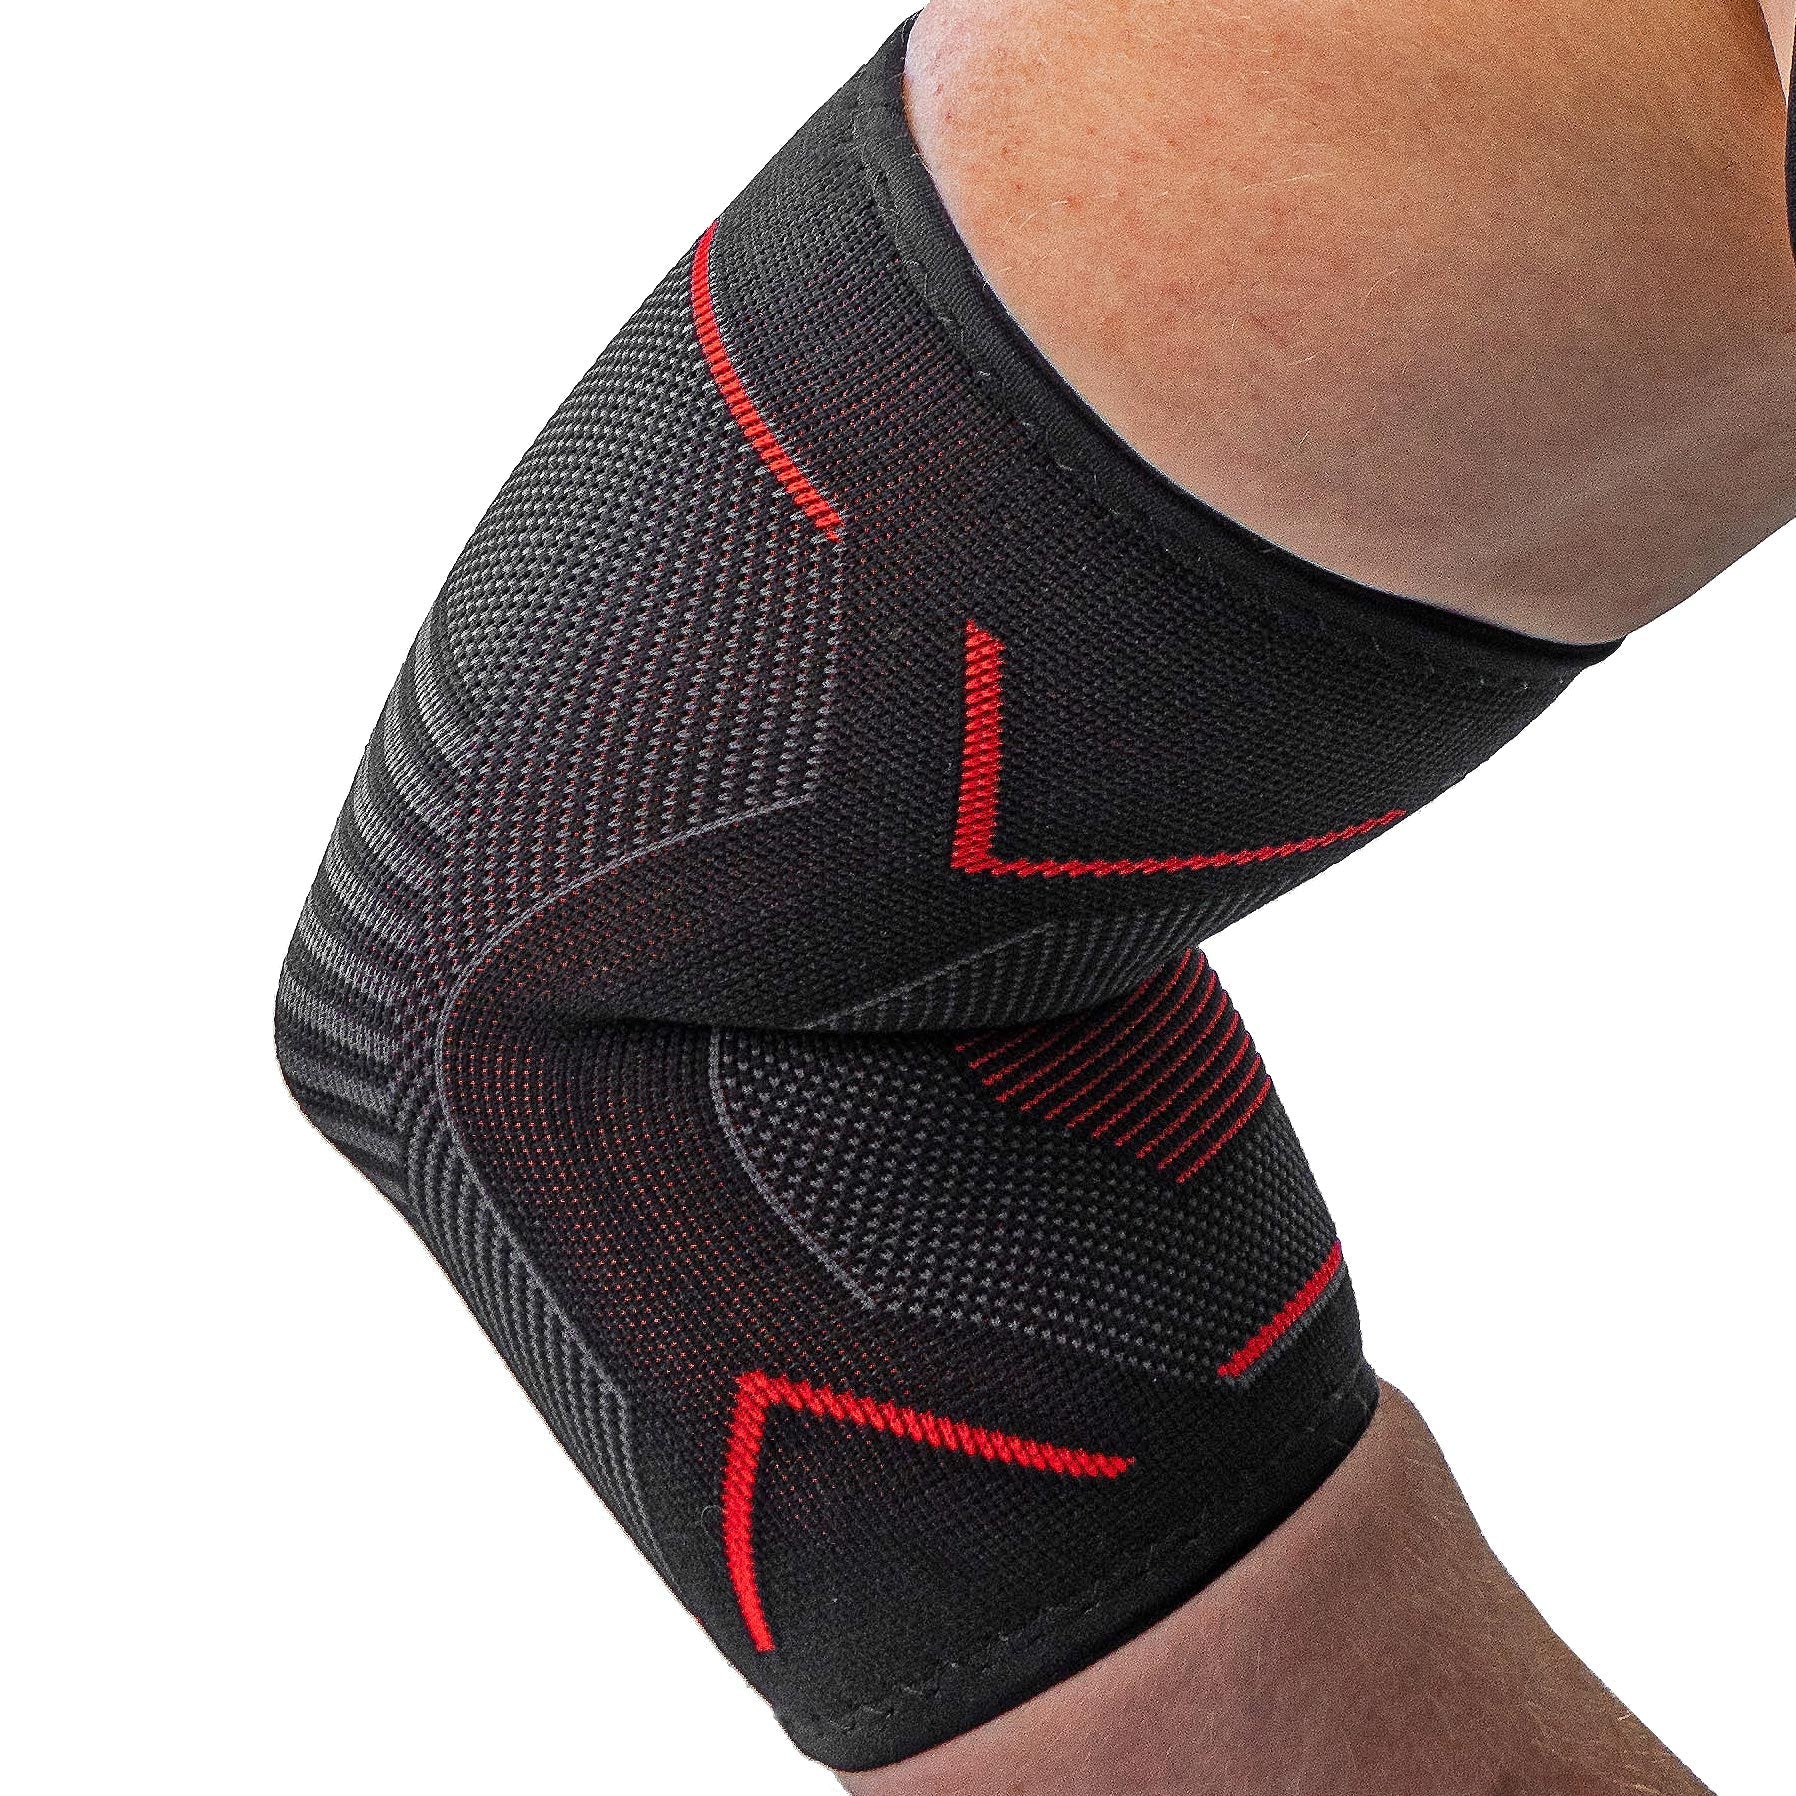 aZengear Elbow Support Compression Brace for Golf, Tennis, Joints Pain  Relief